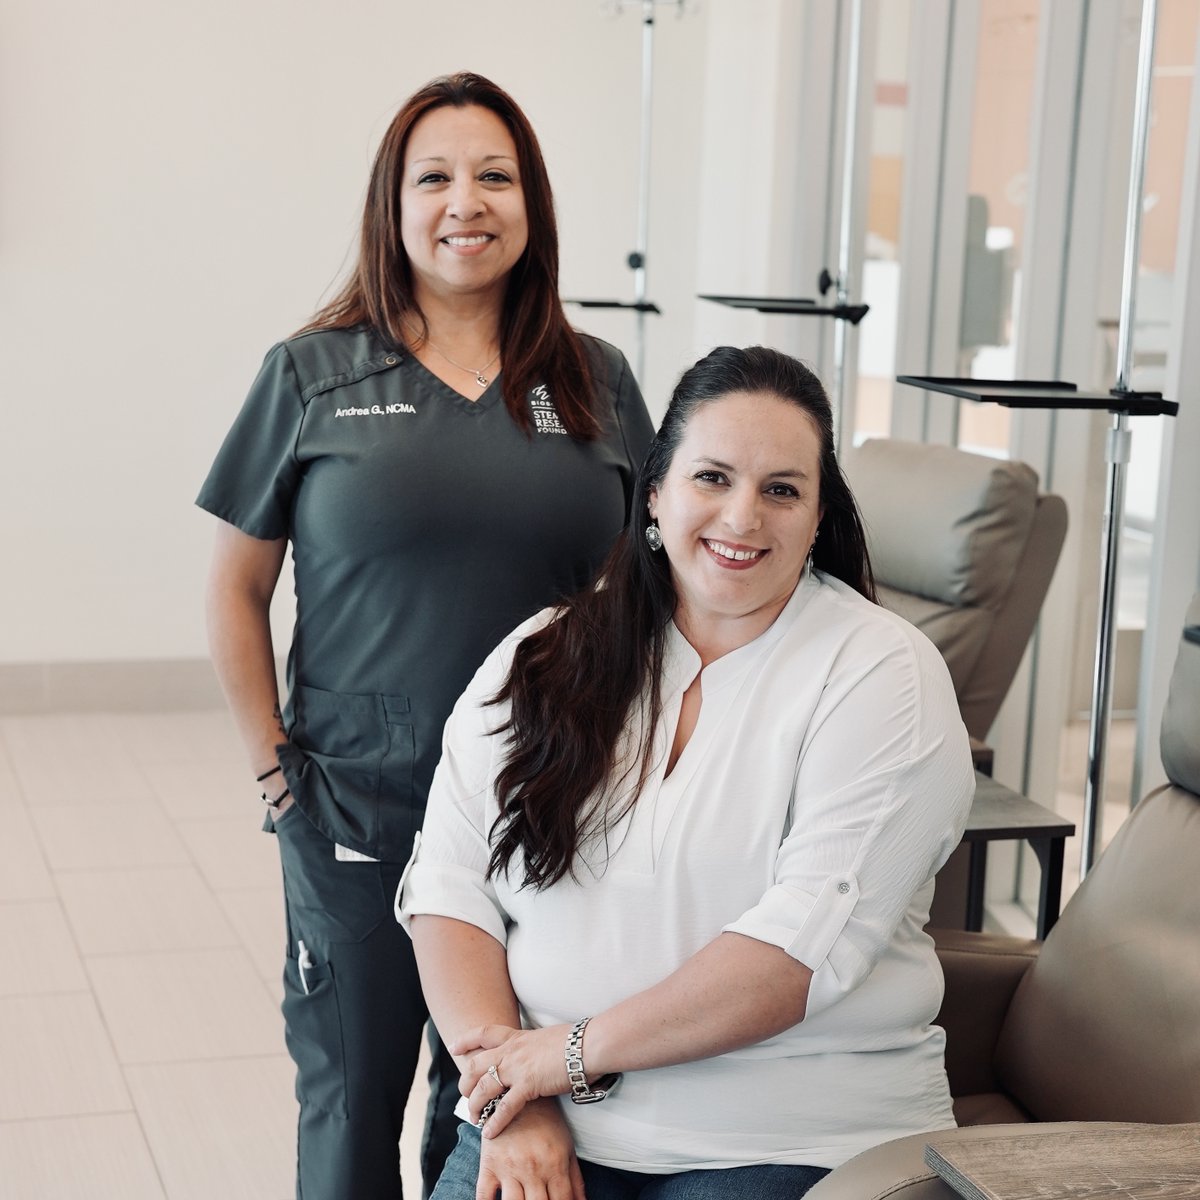 This week, October 16th – 20th, is Medical Assistants Week. Today, October 19th, is designated as Medical Assistants Day. Marcy and Andrea, you are appreciated beyond words. Thank you for your work as vital members of the HBRF team.  #scienceinservice #medicalassistant